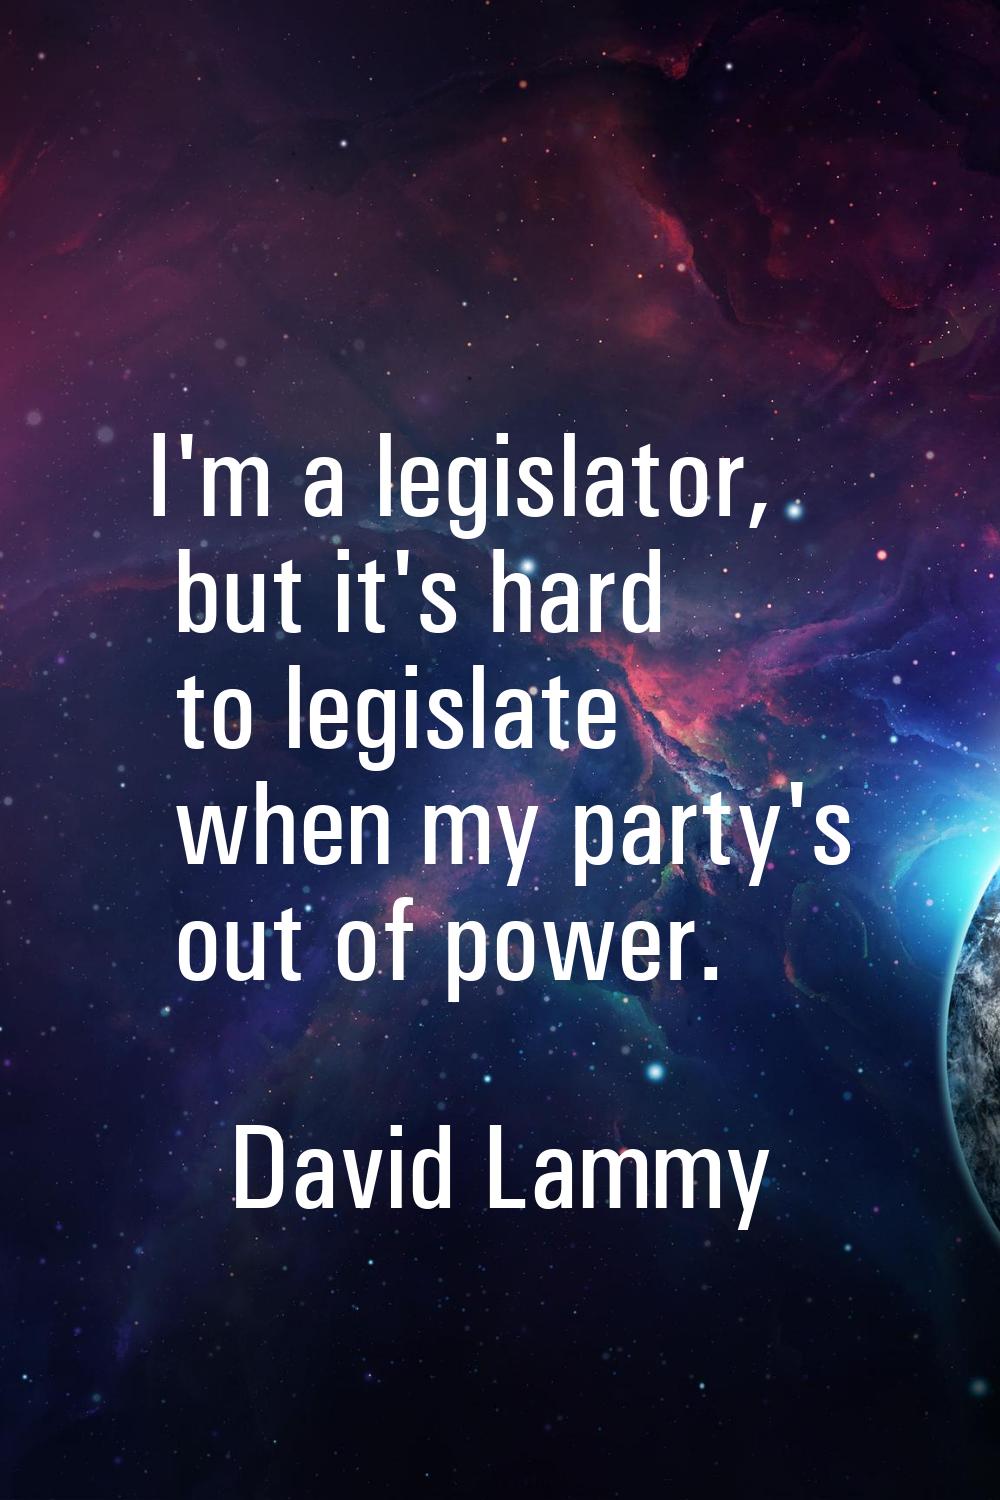 I'm a legislator, but it's hard to legislate when my party's out of power.